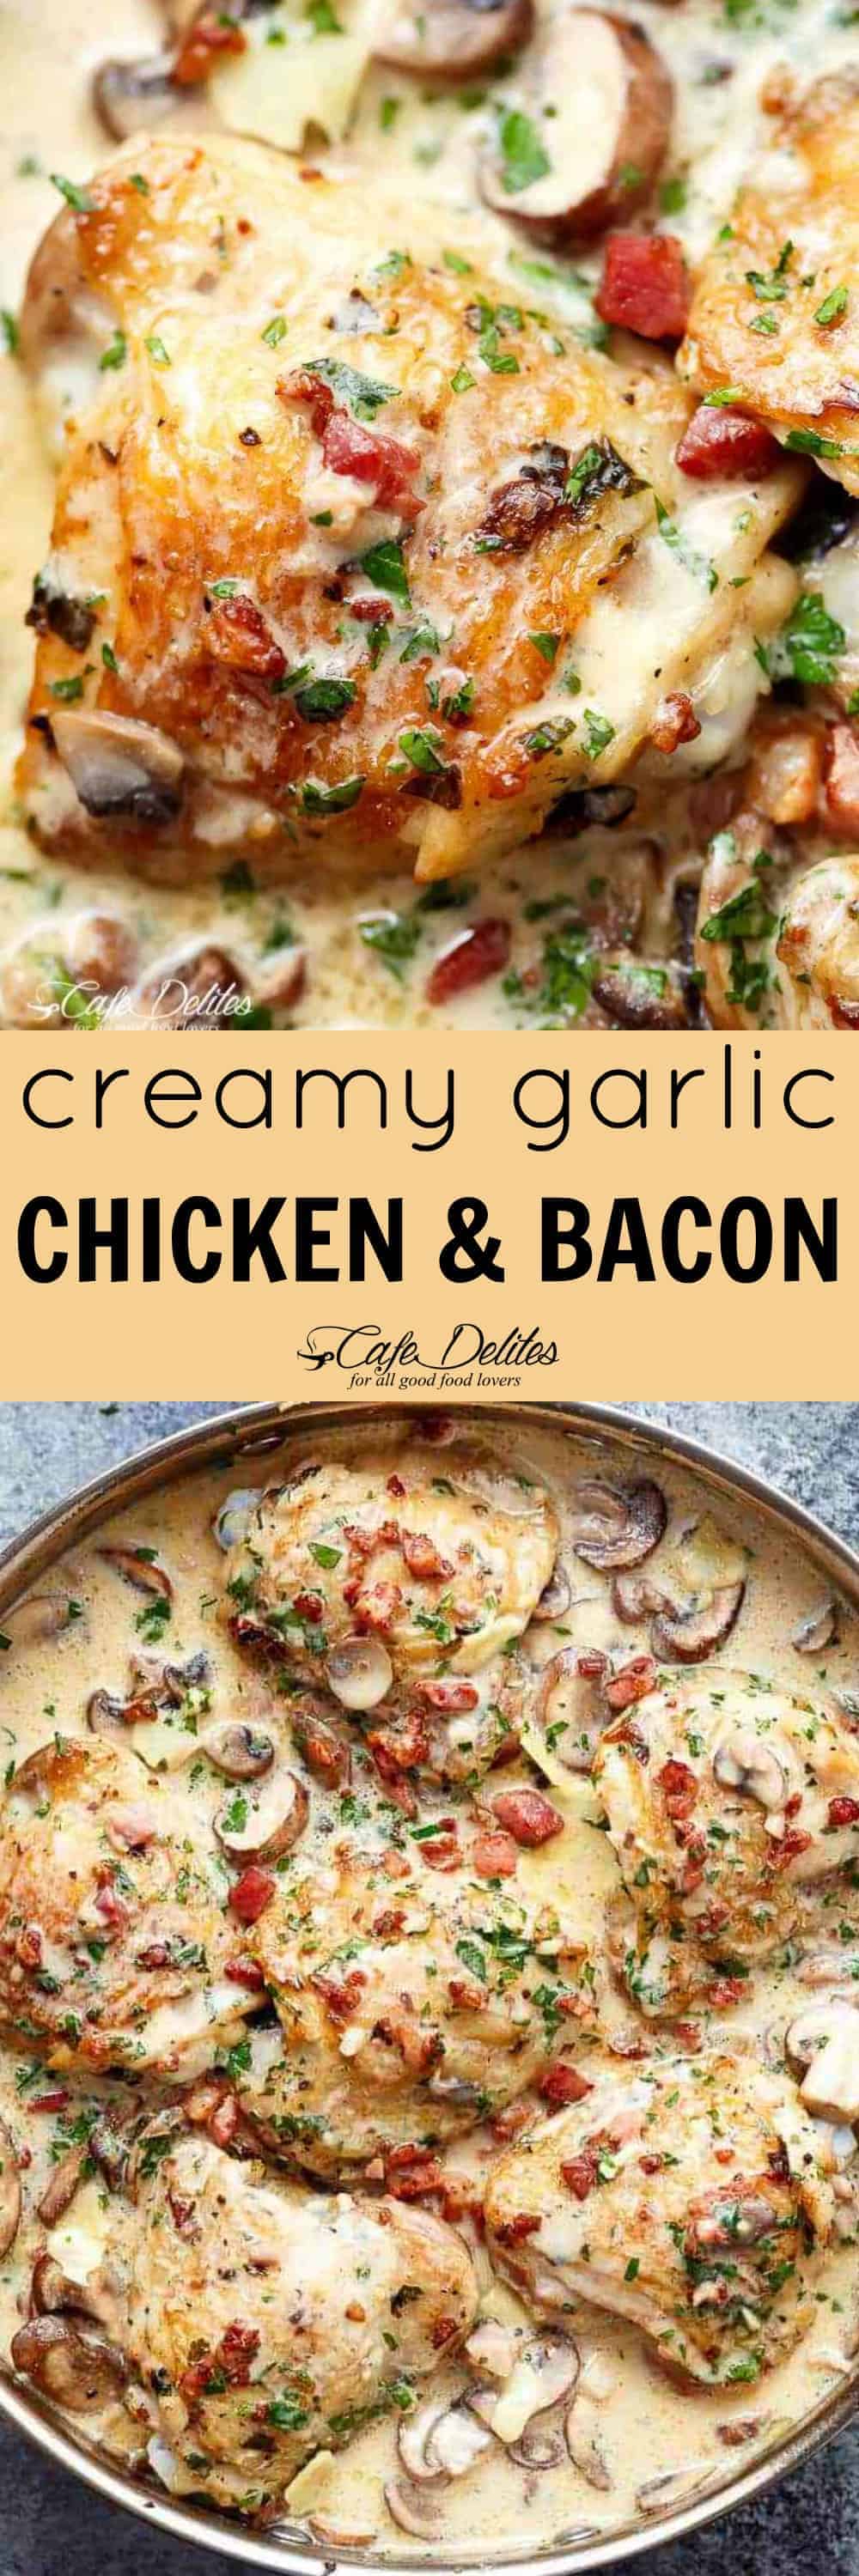 Creamy Baked Chicken Thighs with Mushrooms & Bacon - Cafe Delites